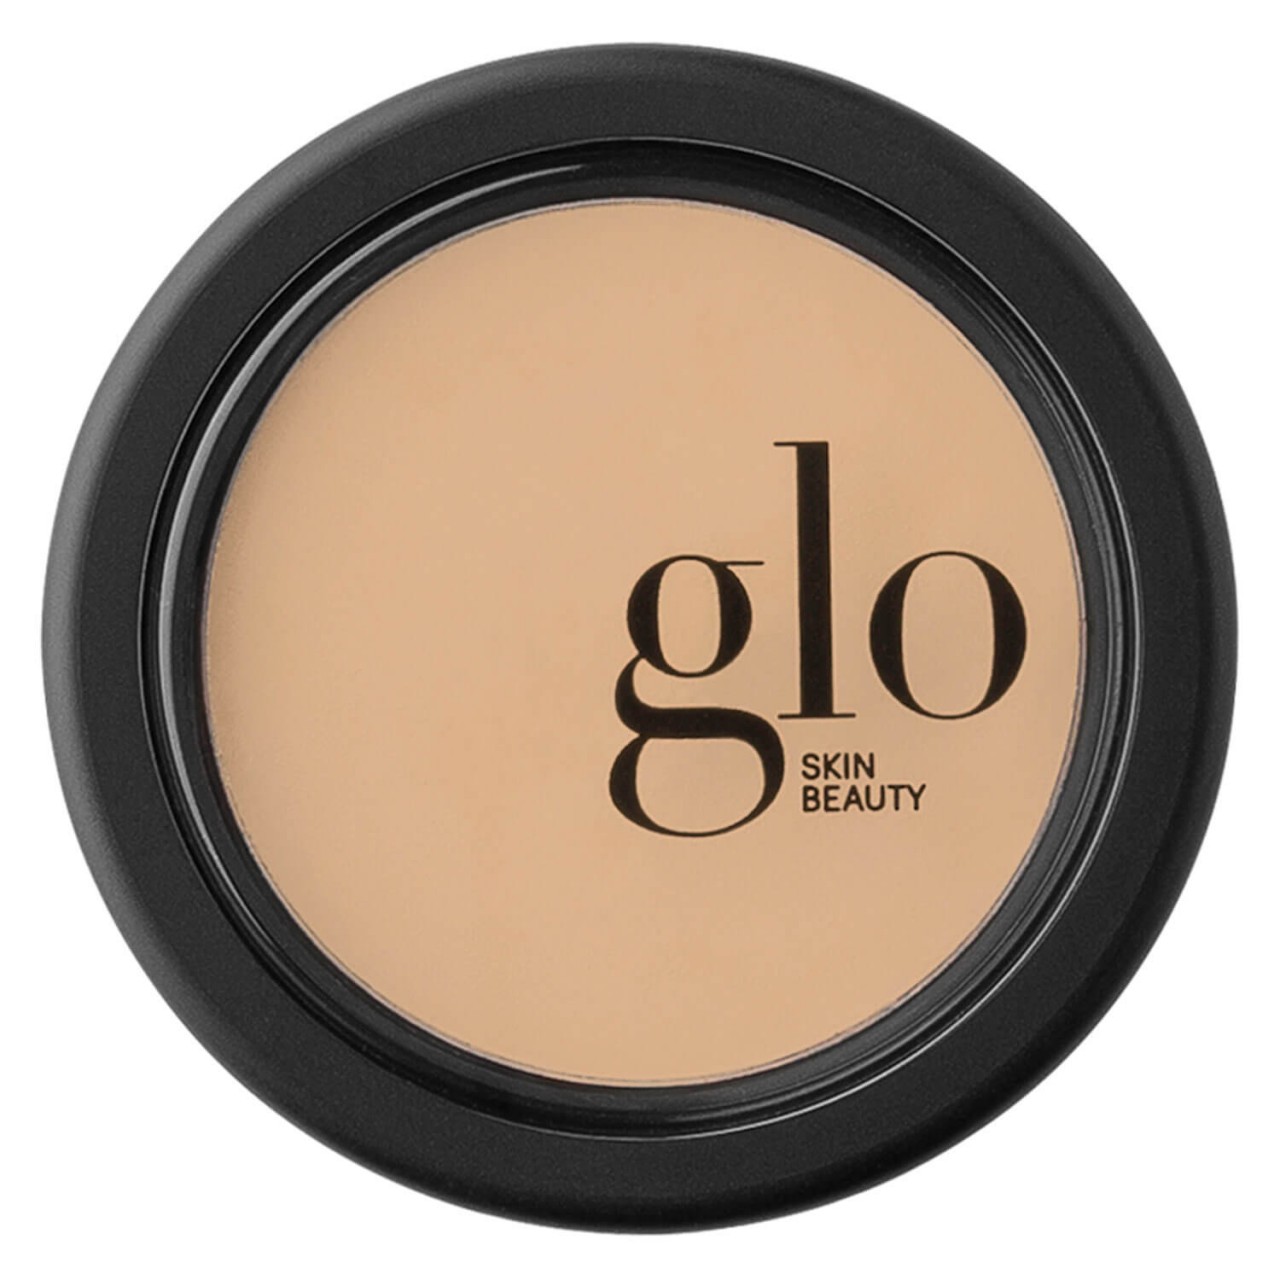 Glo Skin Beauty Camouflage - Oil Free Camouflage Natural von Glo Skin Beauty